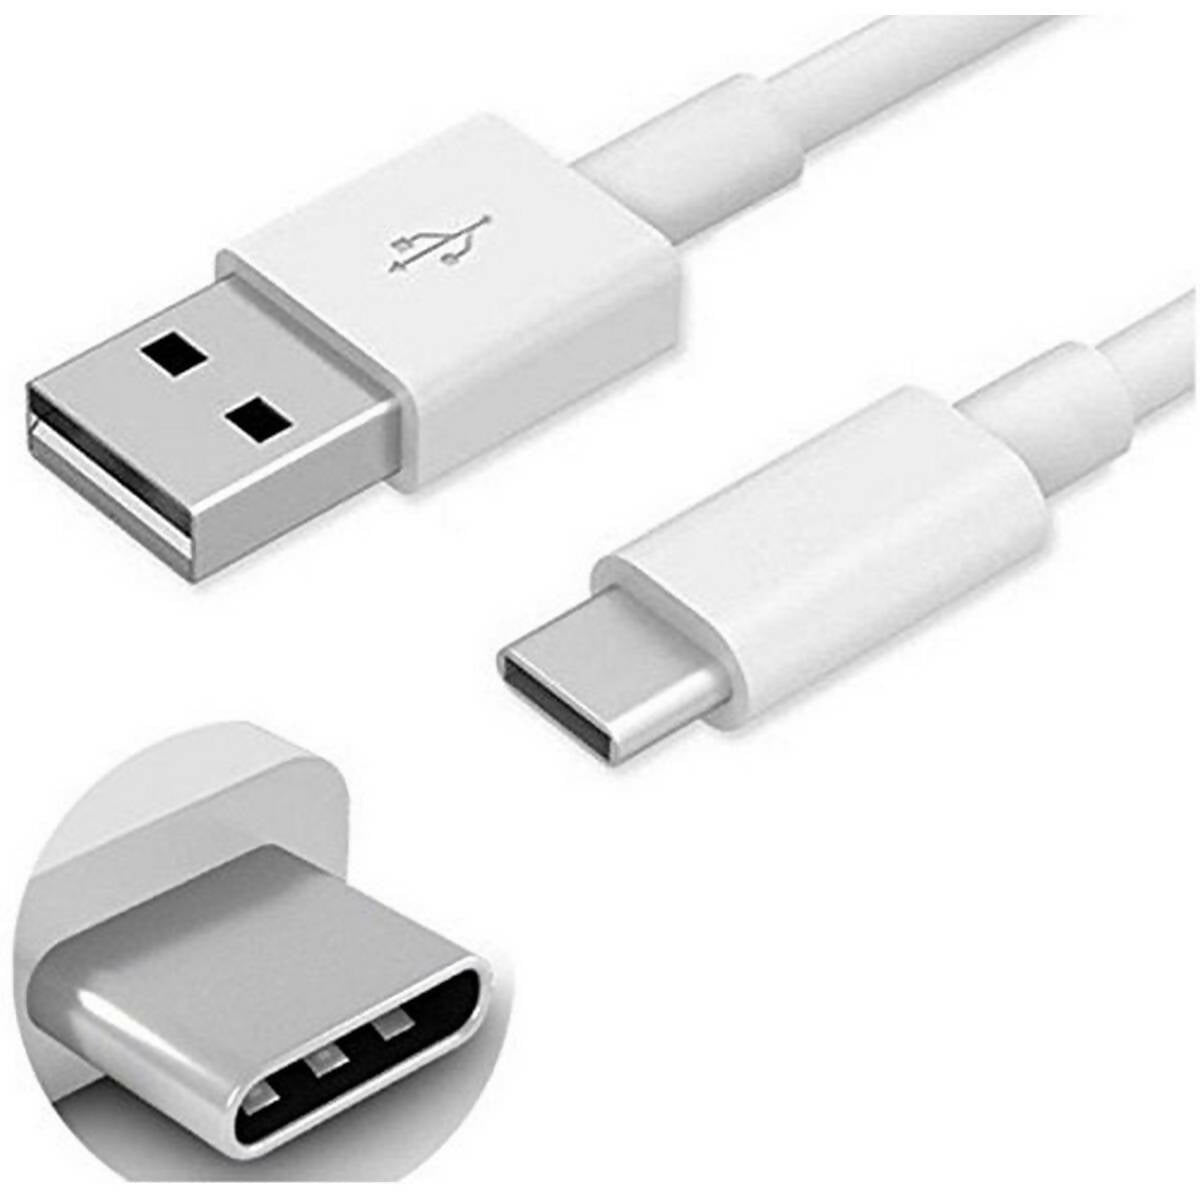 Original Android Type C Cable 1.5M Meter Fast Charging and Data Syncing Cable Compatible for all Android type C Devices